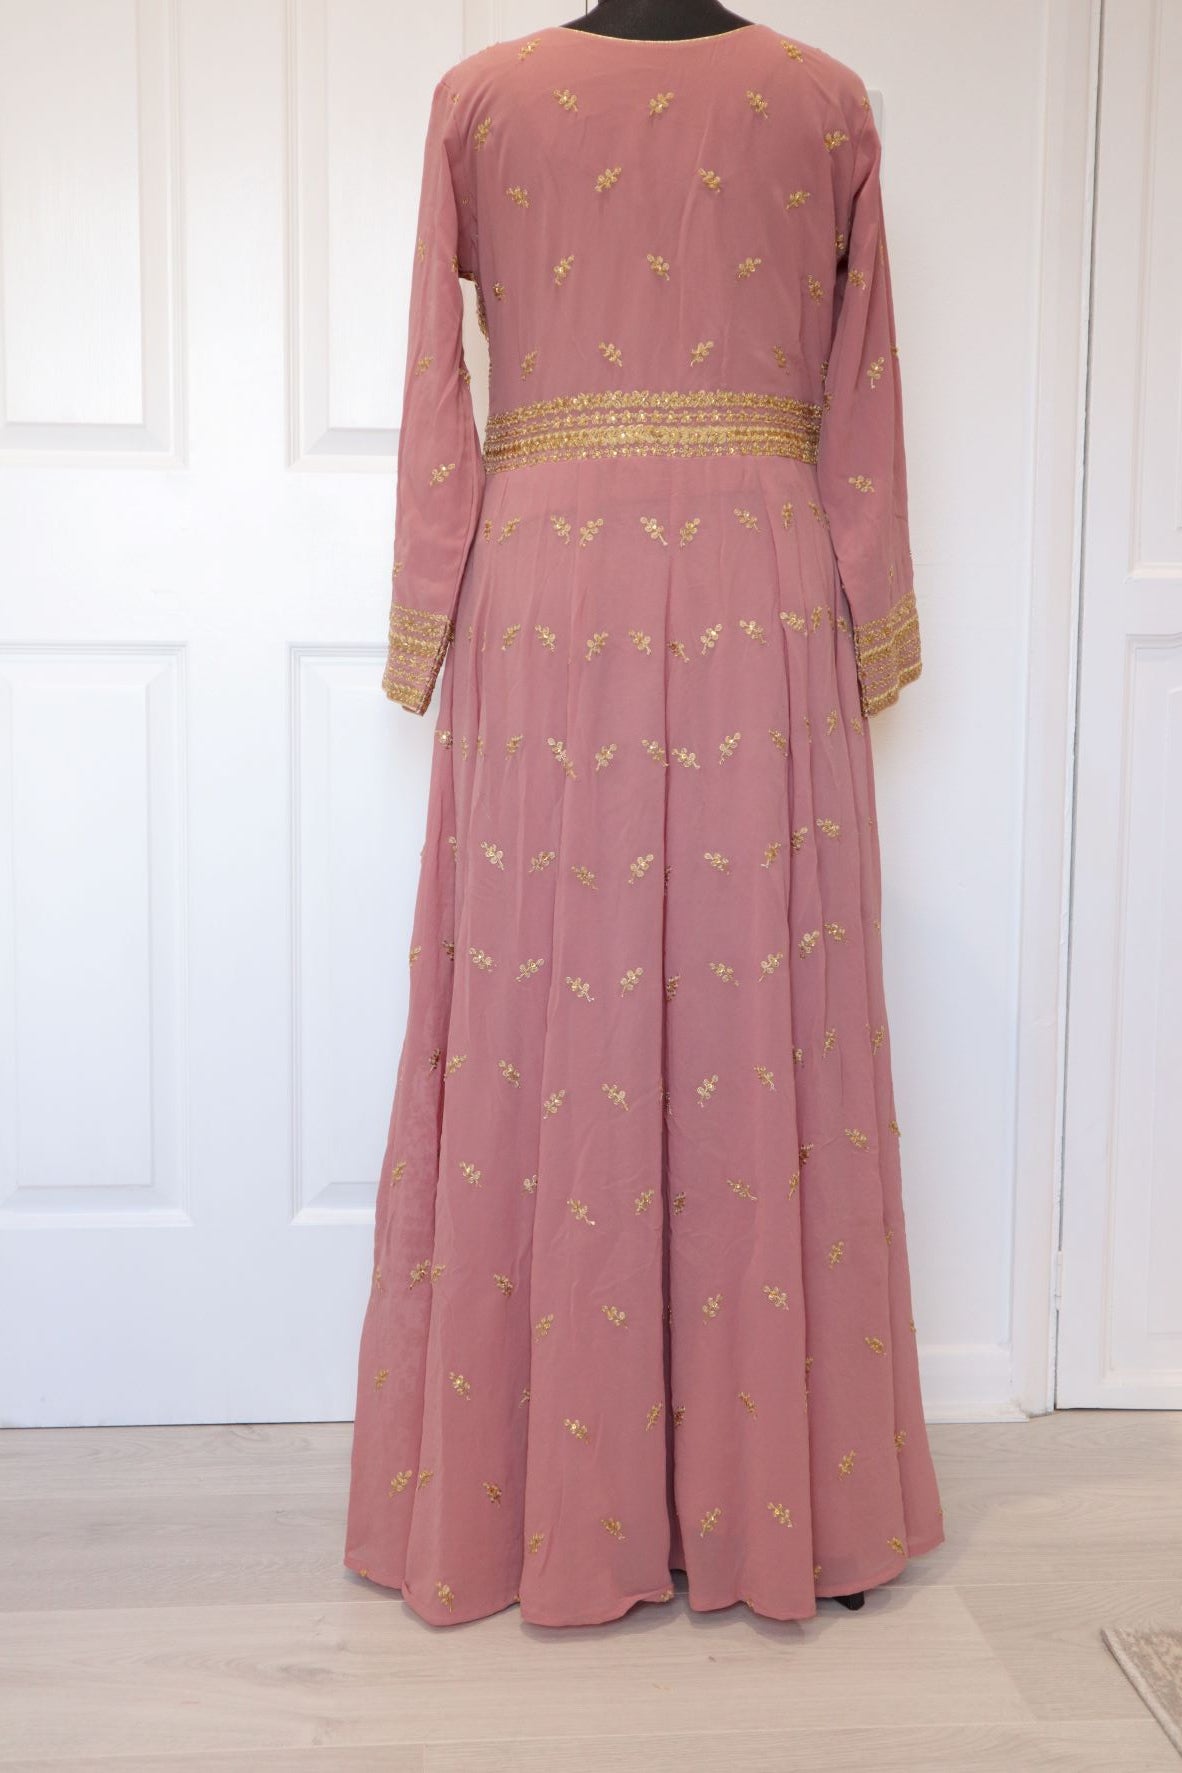 Mauve and Gold Floral Gown Size 8-10 (bust 38")